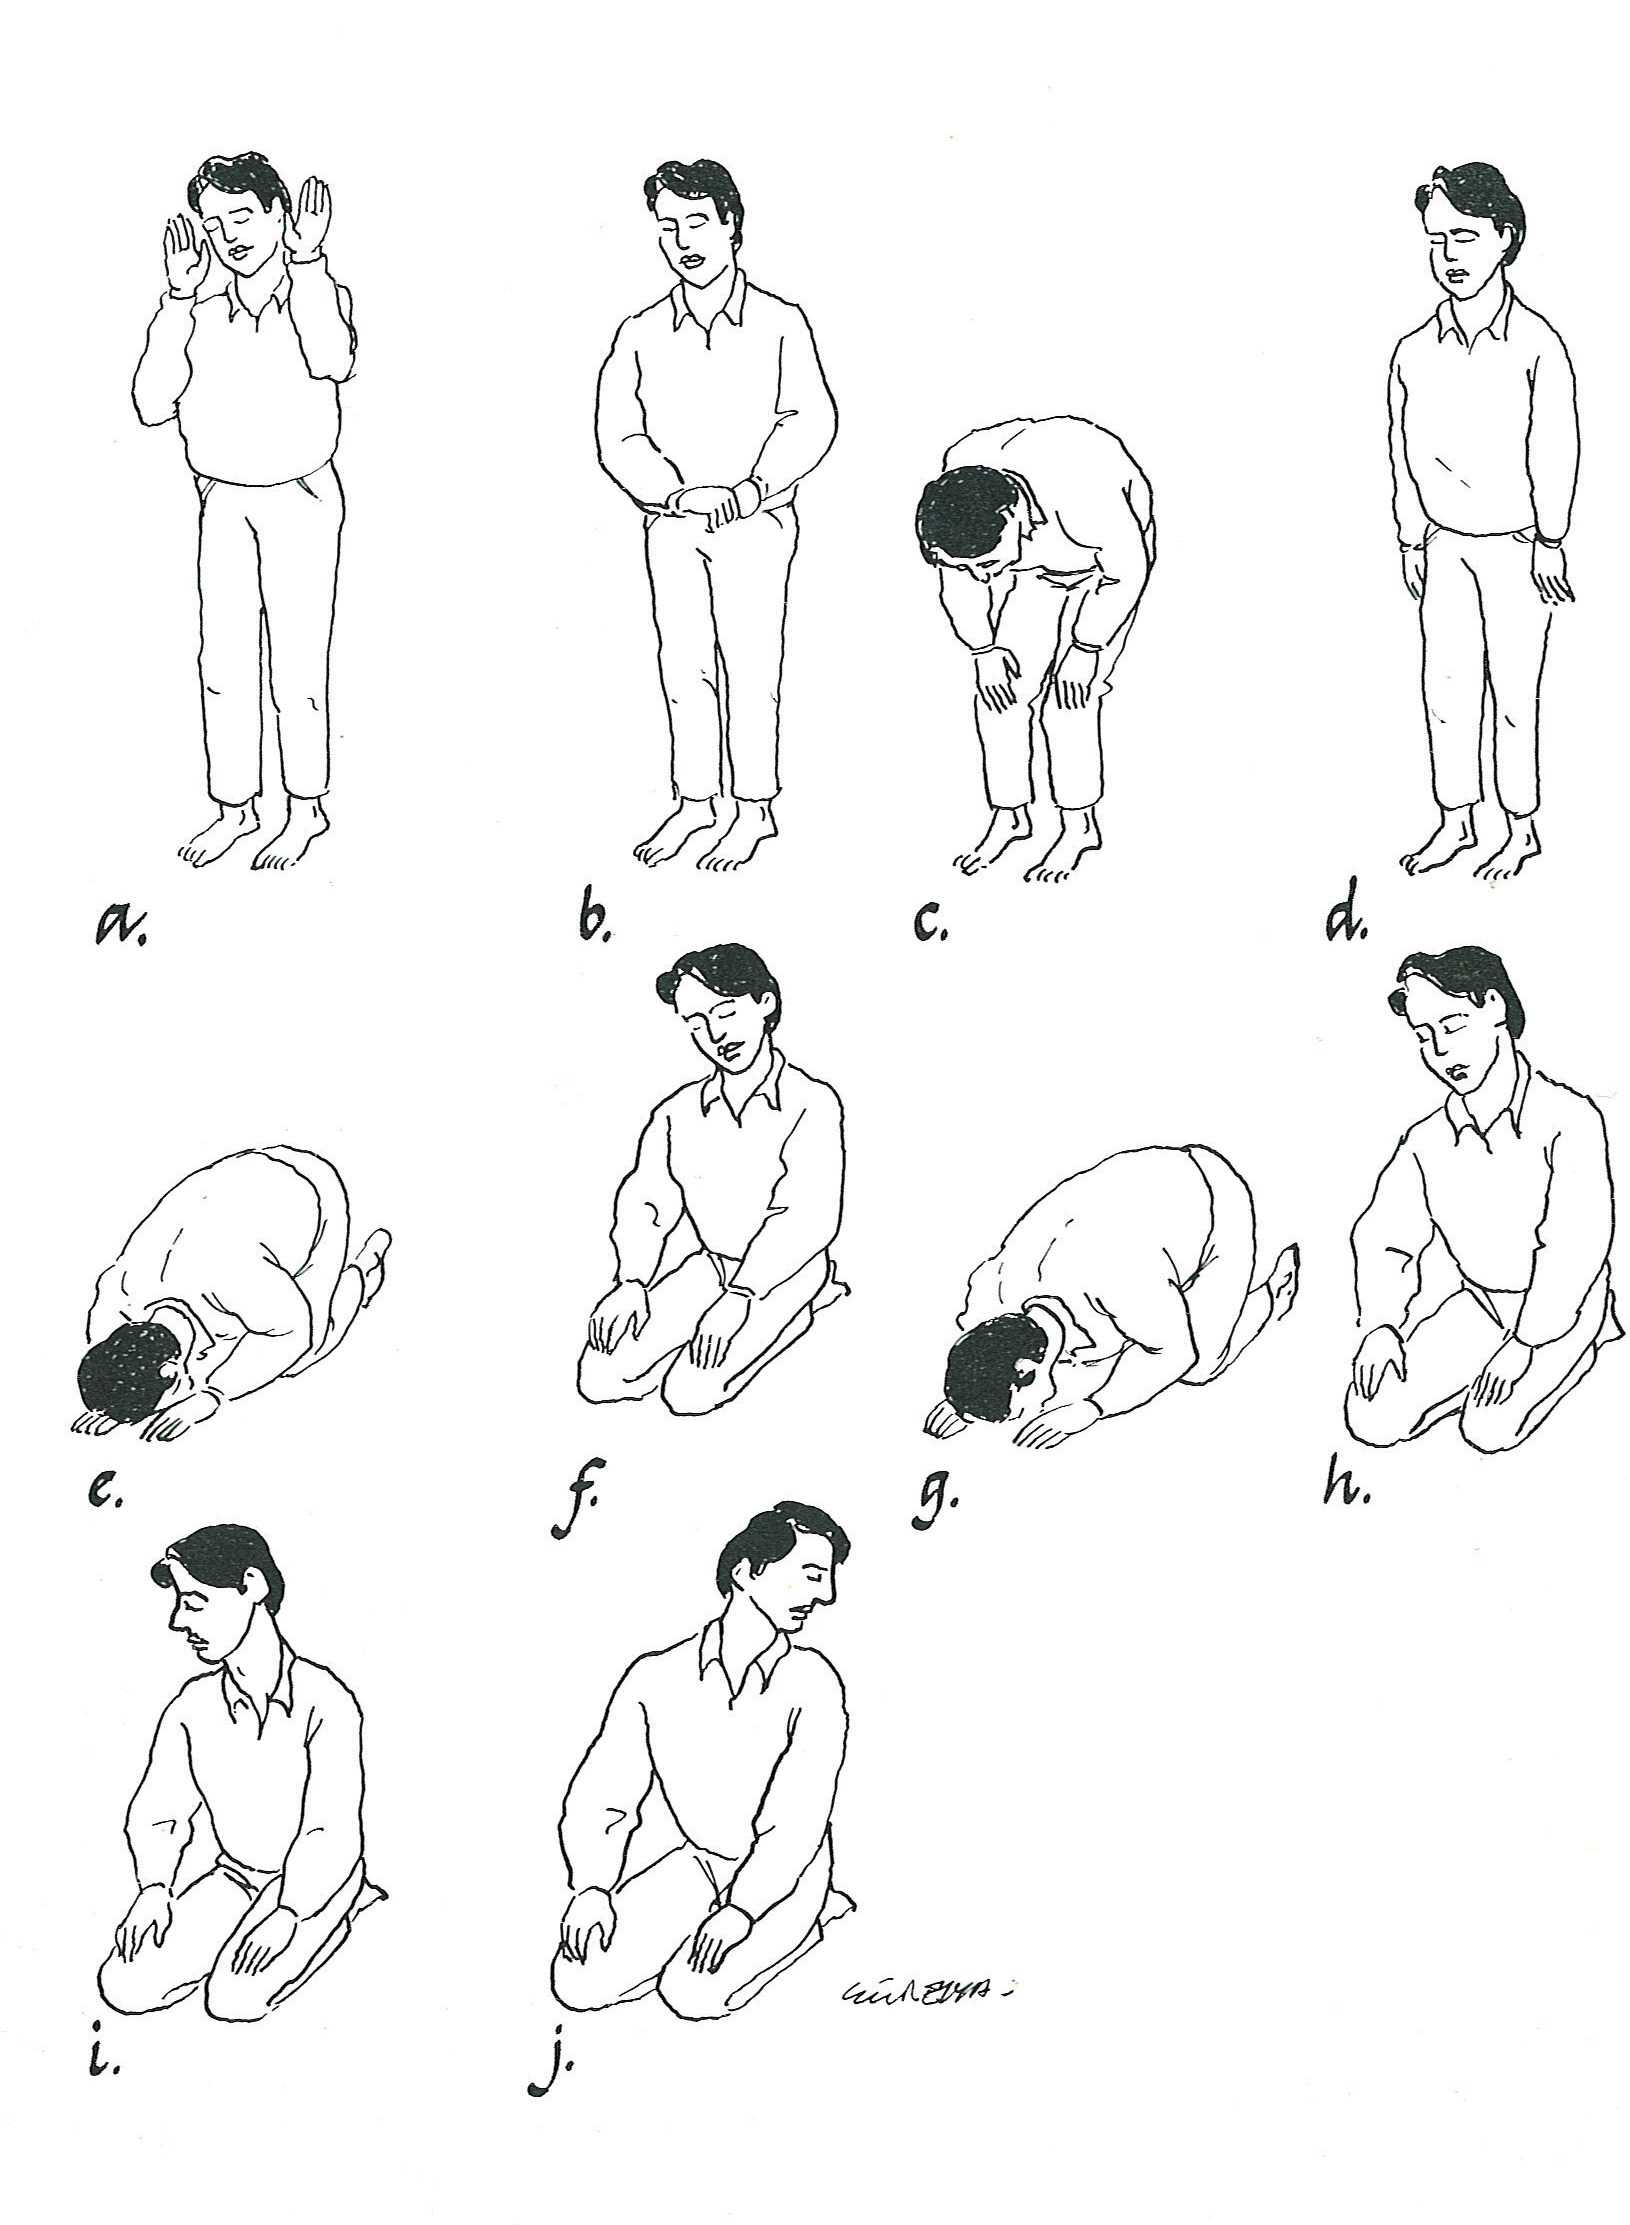 Counting Techniques Worksheet and File Salat Positions Wikimedia Mons